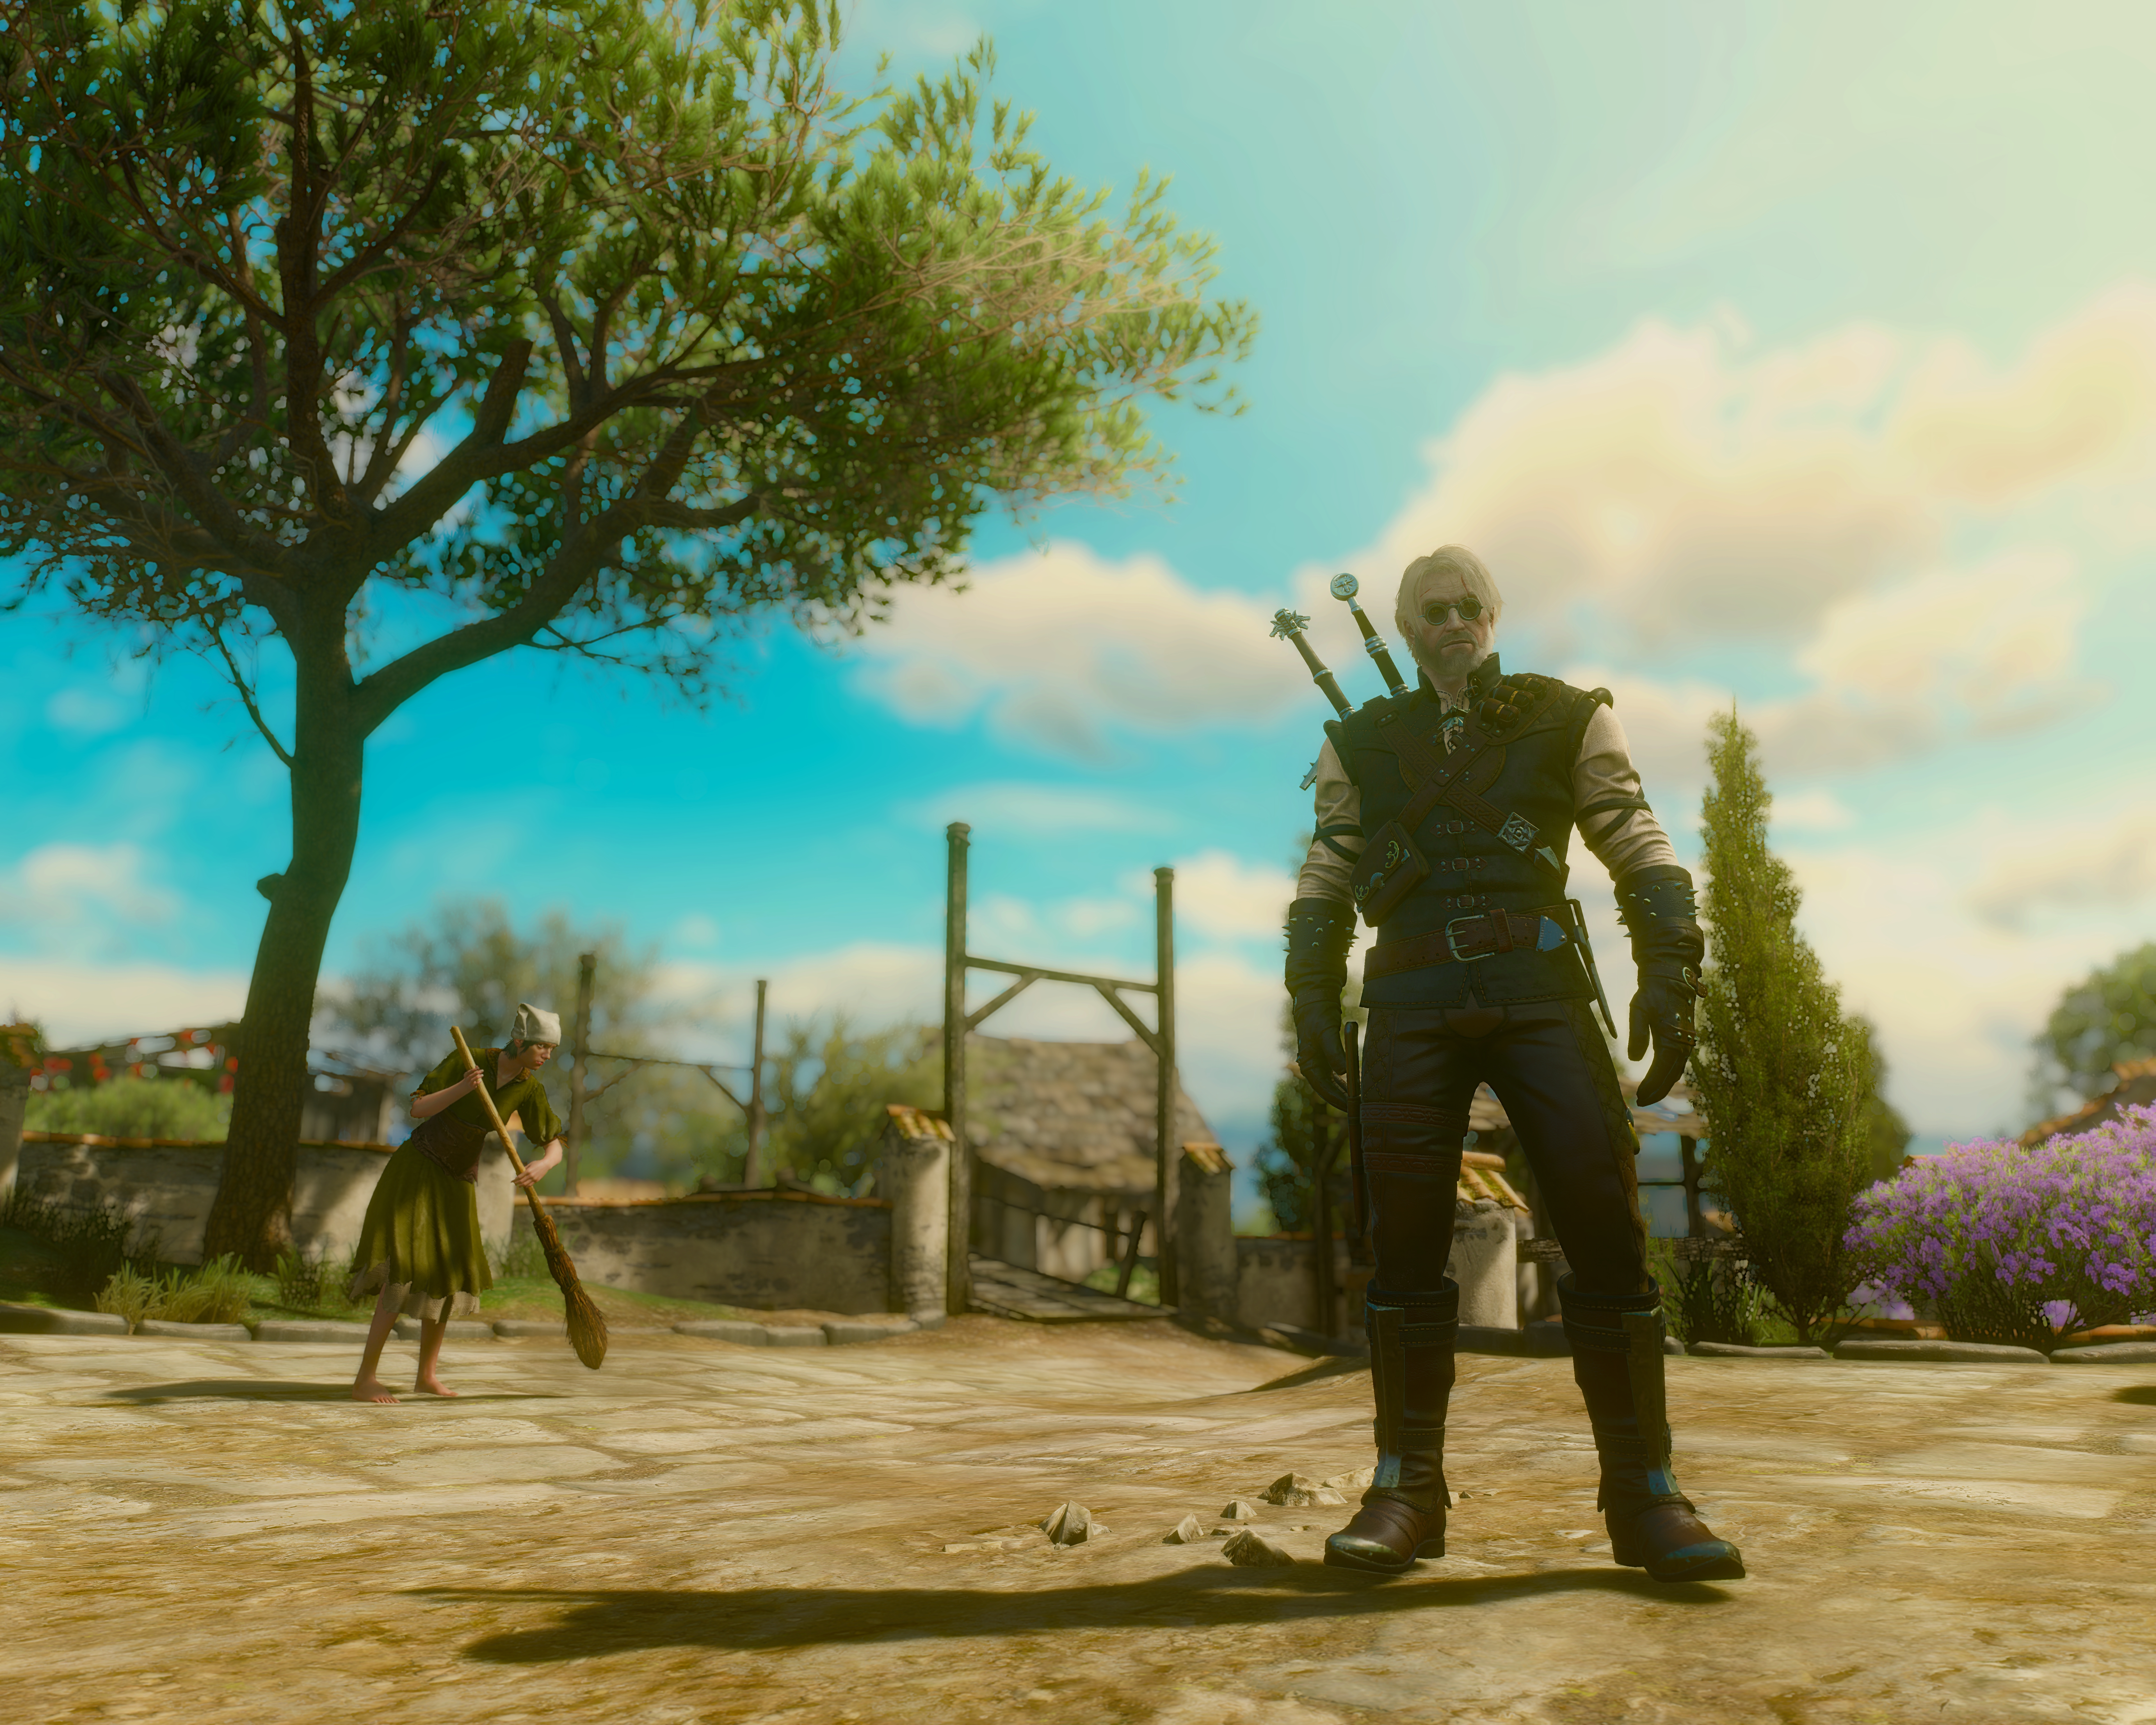 General 7680x6144 The Witcher The Witcher 3: Wild Hunt CD Projekt RED Geralt of Rivia screen shot The Witcher 3: Wild Hunt - Blood and Wine video games video game characters